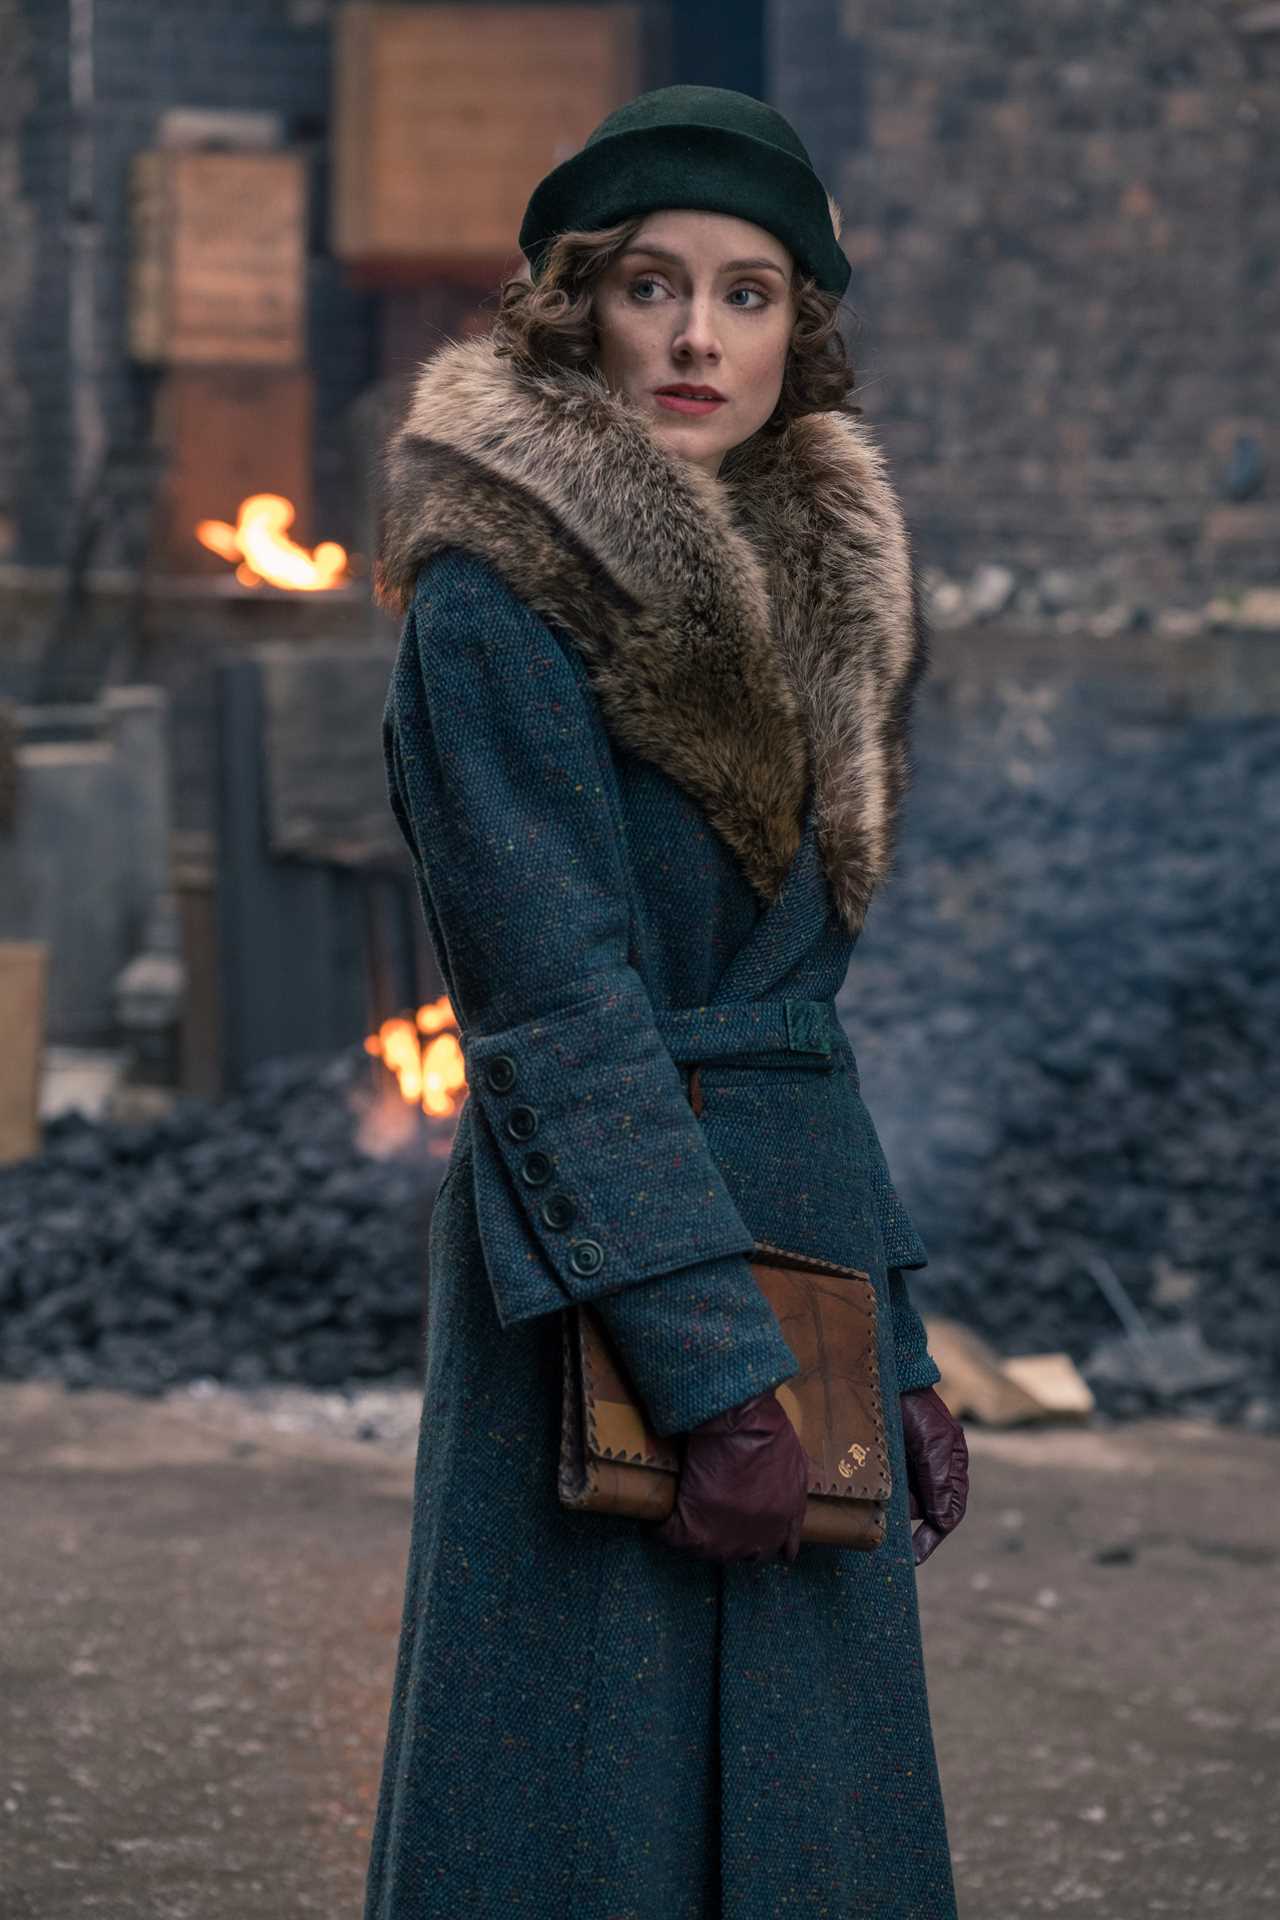 Peaky Blinders star Sophie Rundle rushed to hospital with coronavirus and ‘hardcore vomiting’ – ruining her Christmas